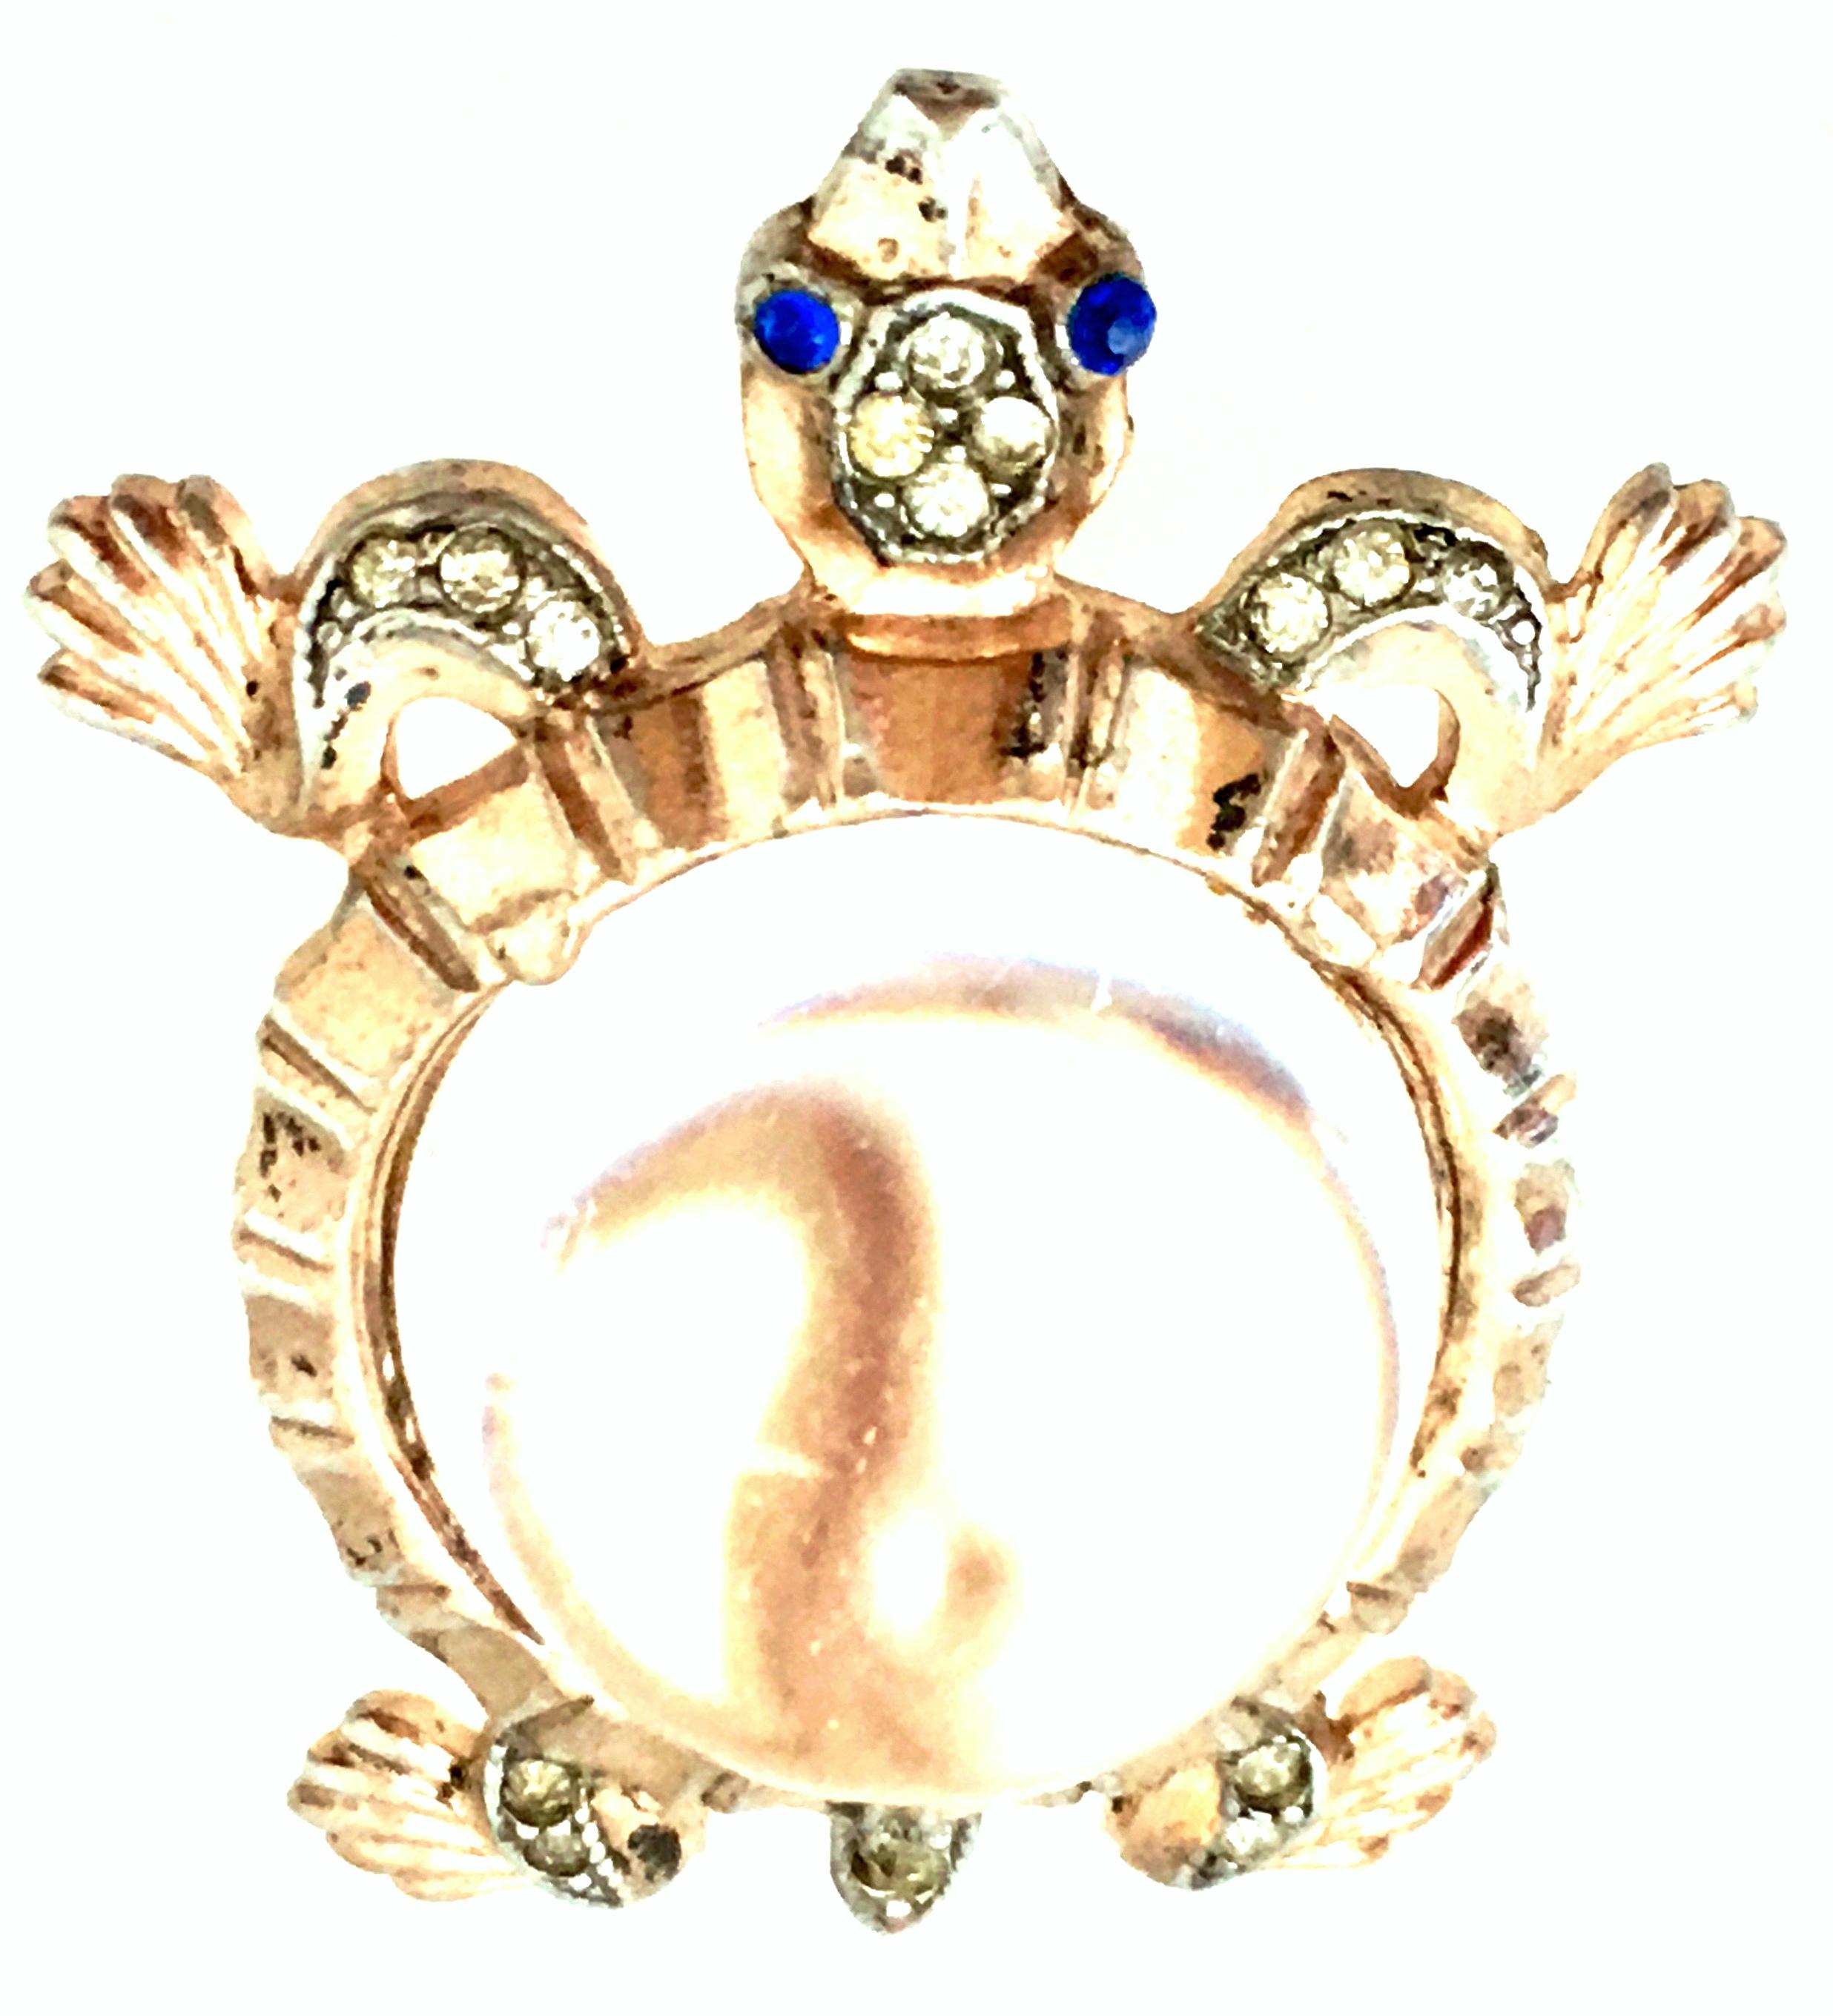 1940'S Iconic & Coveted Sterling Silver, Gold Vermeil, Lucite & Austrian Crystal Turtle Jelly Belly Brooch By, Alfred Phillipe For Trifari. This rare collectors Turtle Jelly Belly is executed in sterling silver with a gold wash finish, colorless